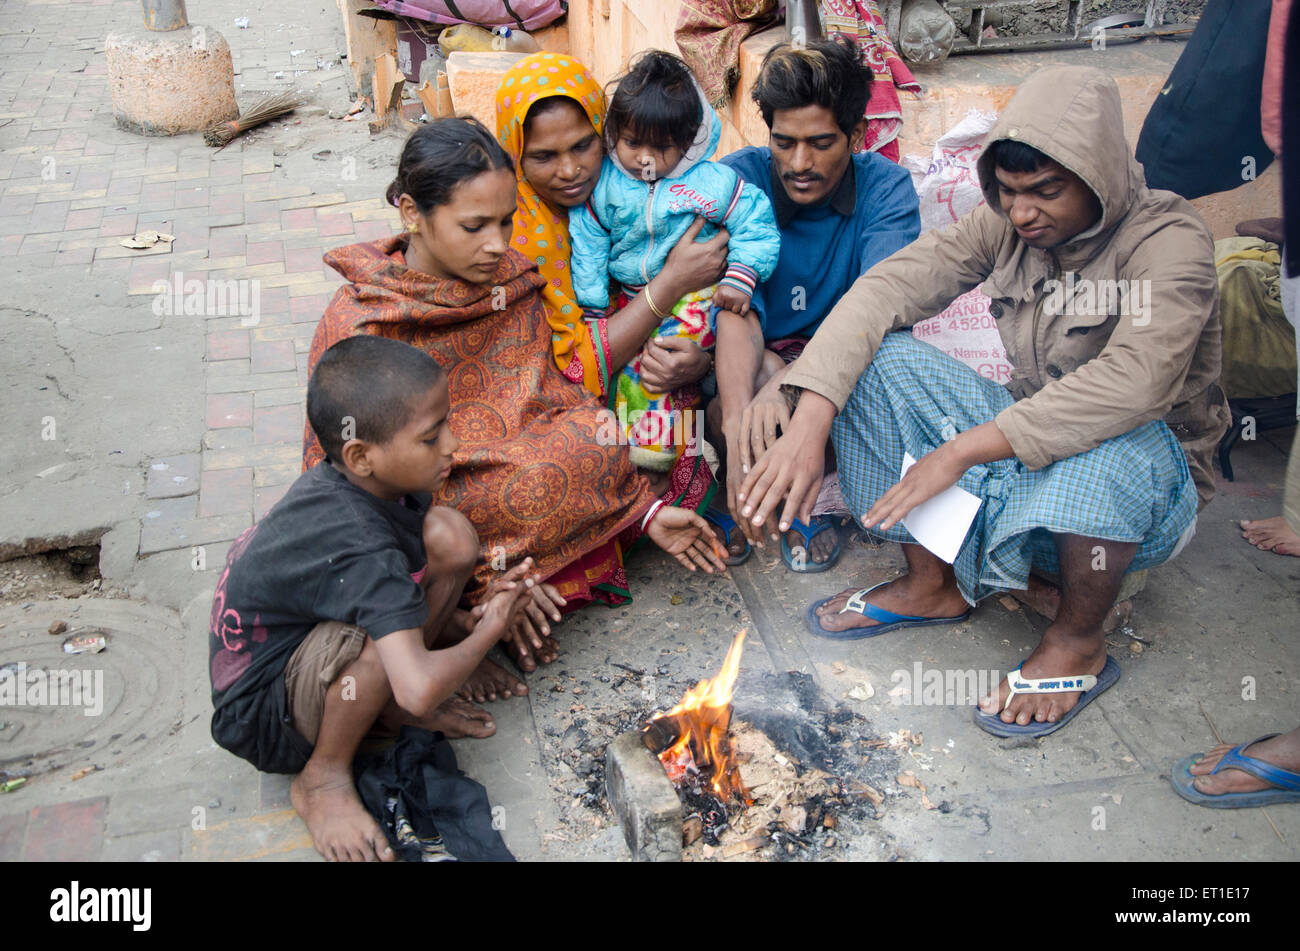 peoples warming hands over fire Kolkata West Bengal India Asia Stock Photo